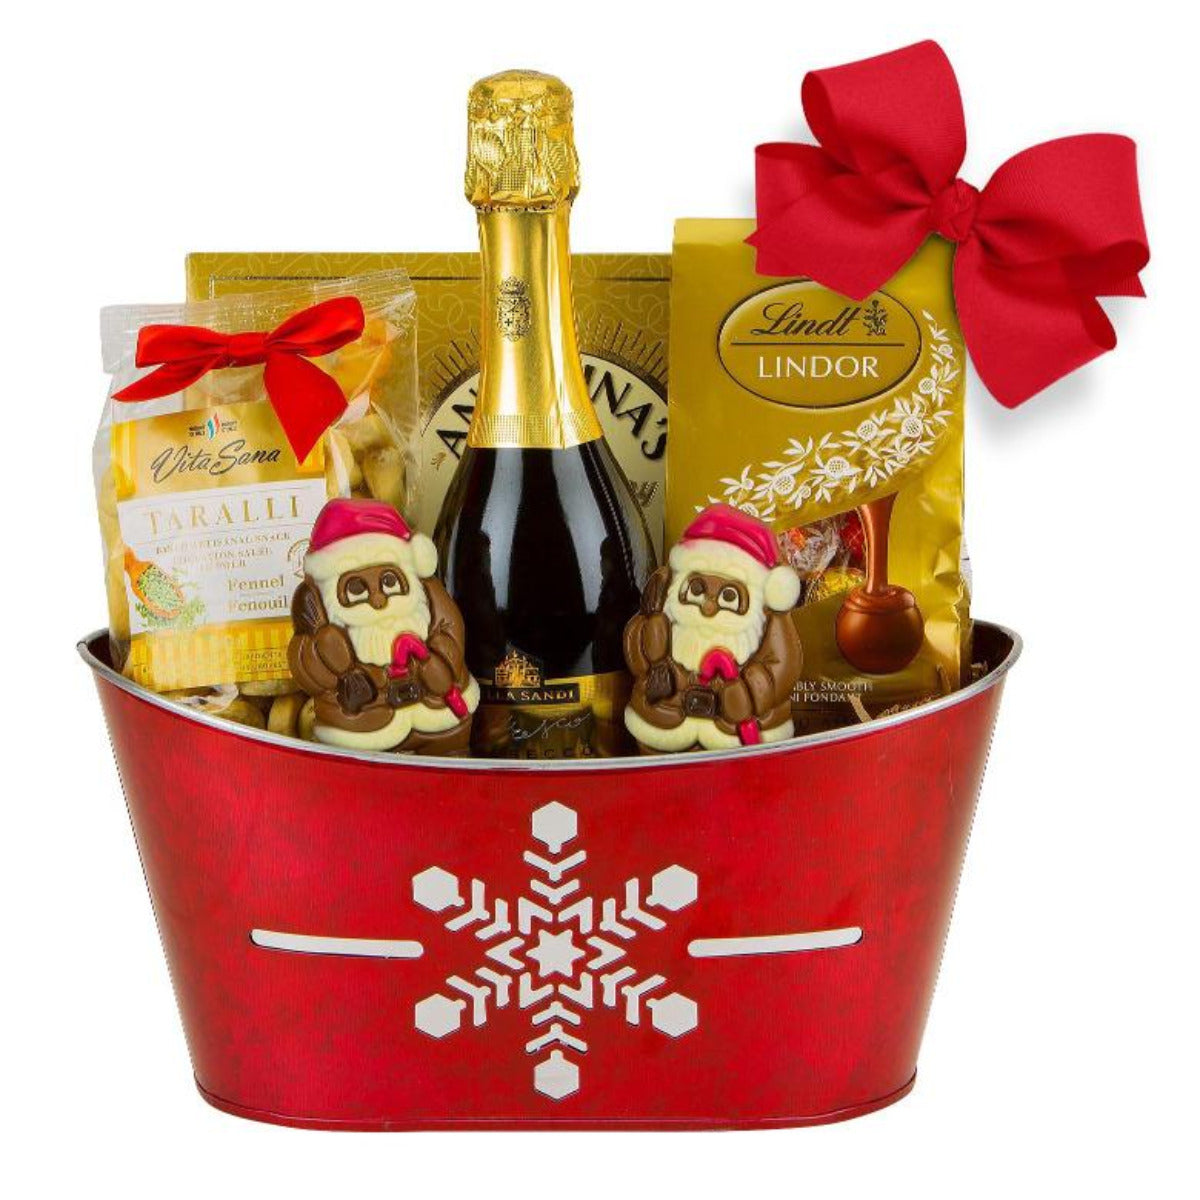 christmas gift basket with champagne, the best quality chocolate, italian crackers and santa figures.